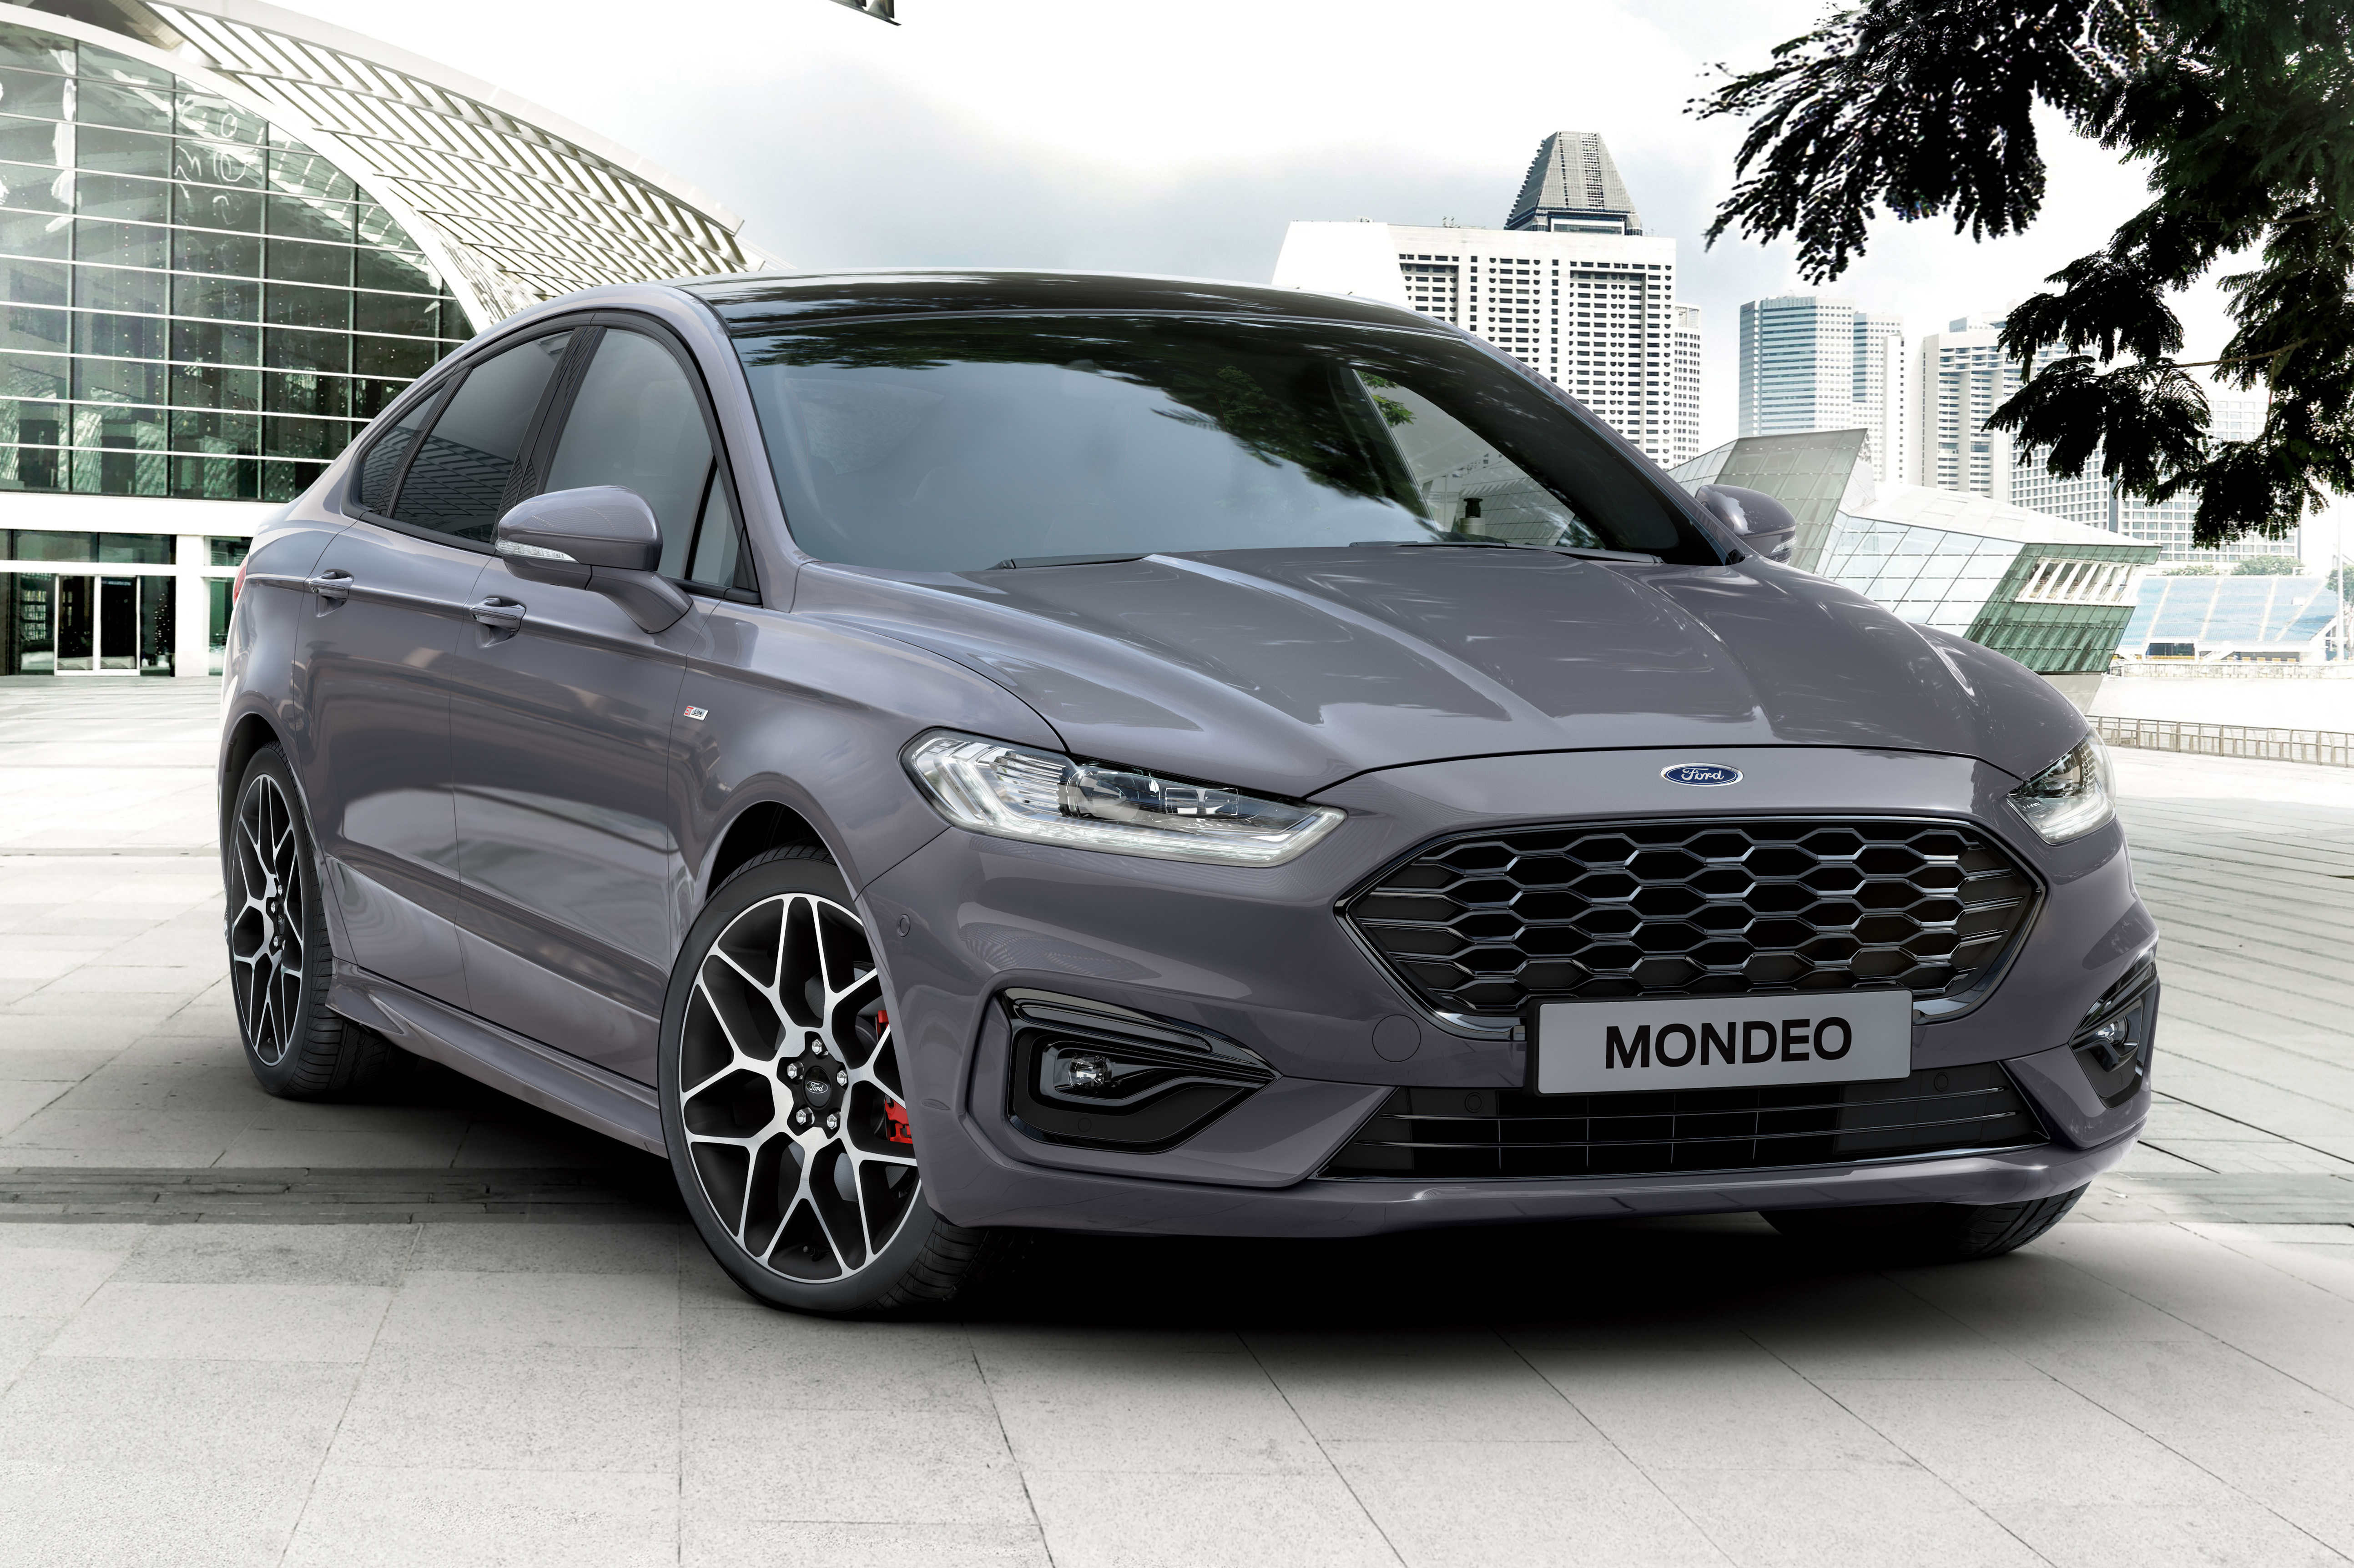 Ford Mondeo to be discontinued March 29 years | Autocar